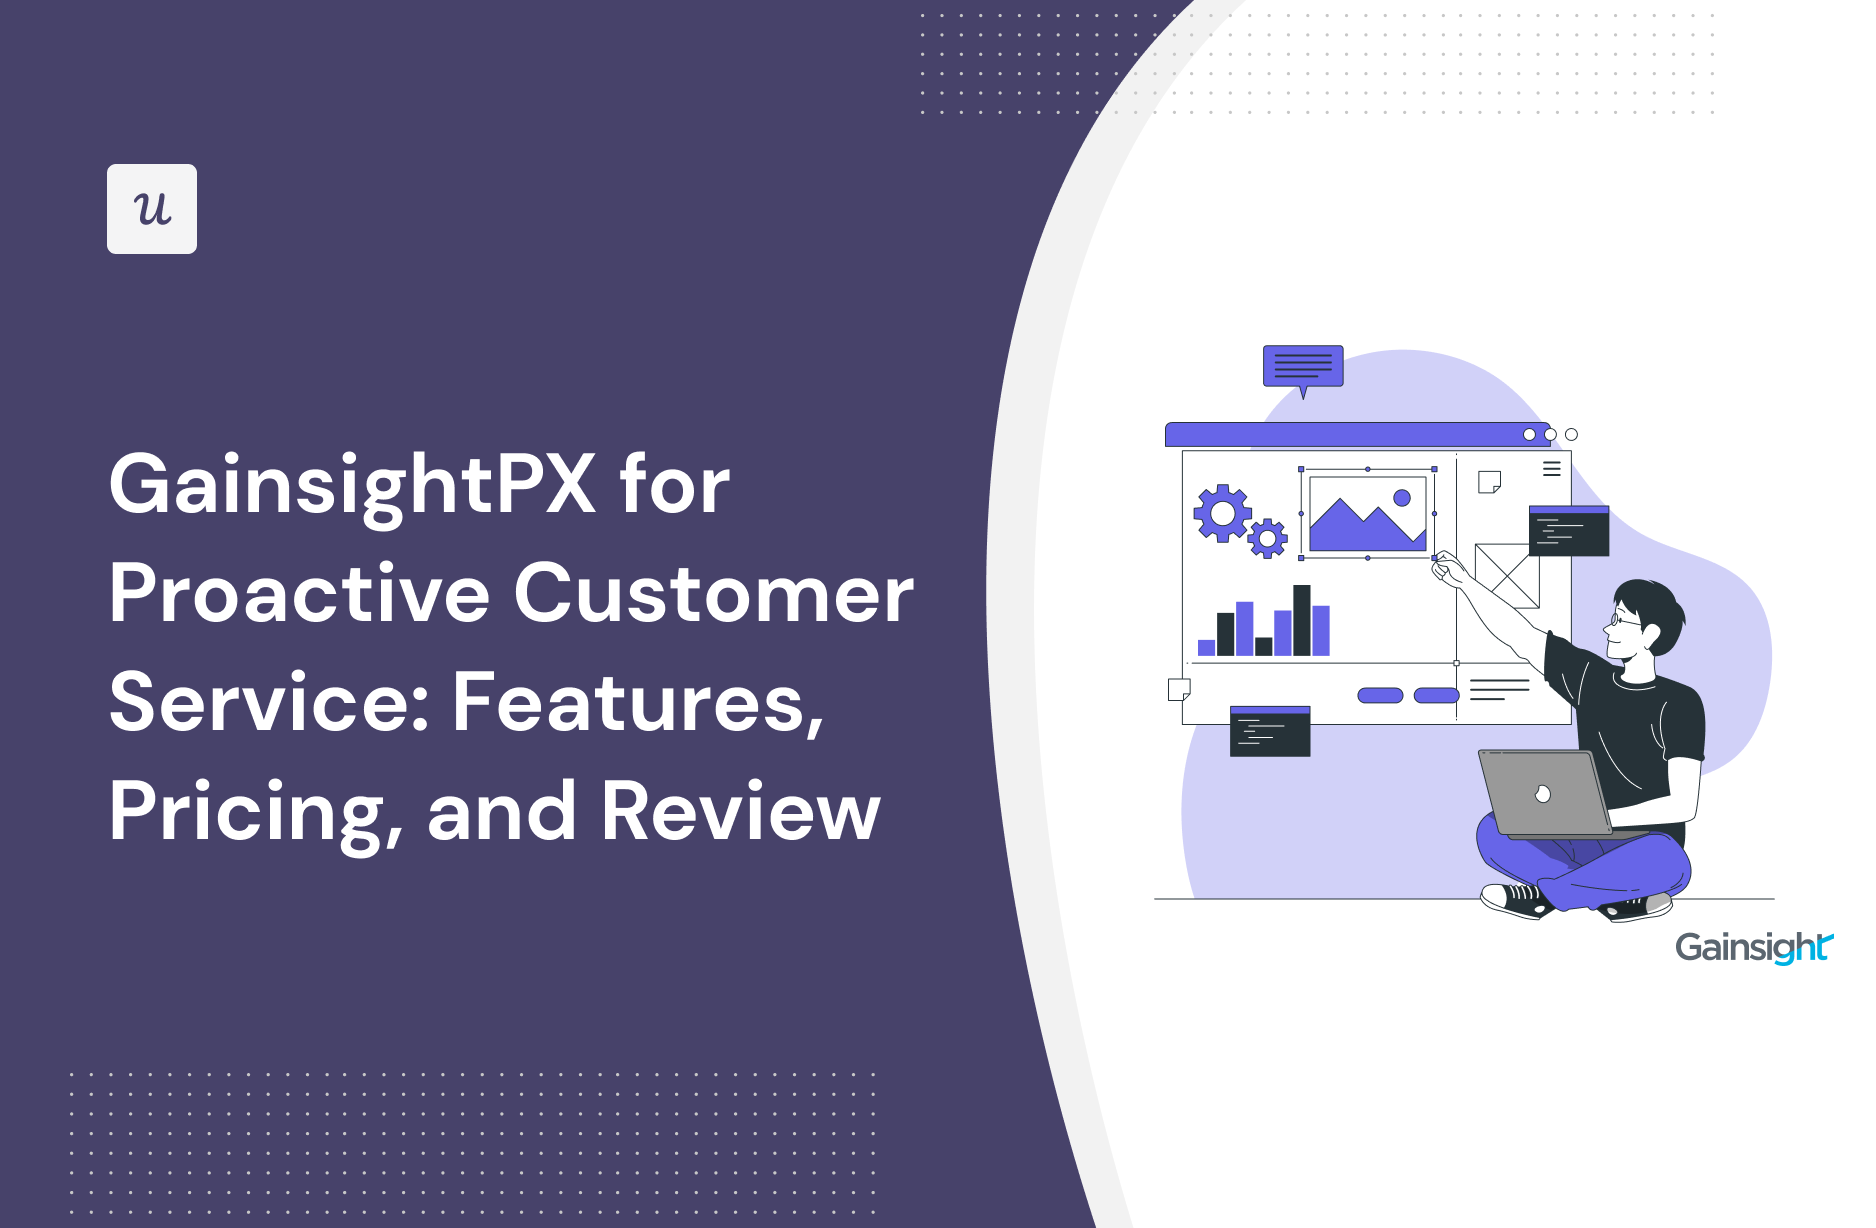 GainsightPX for Proactive Customer Service: Features, Pricing, and Review